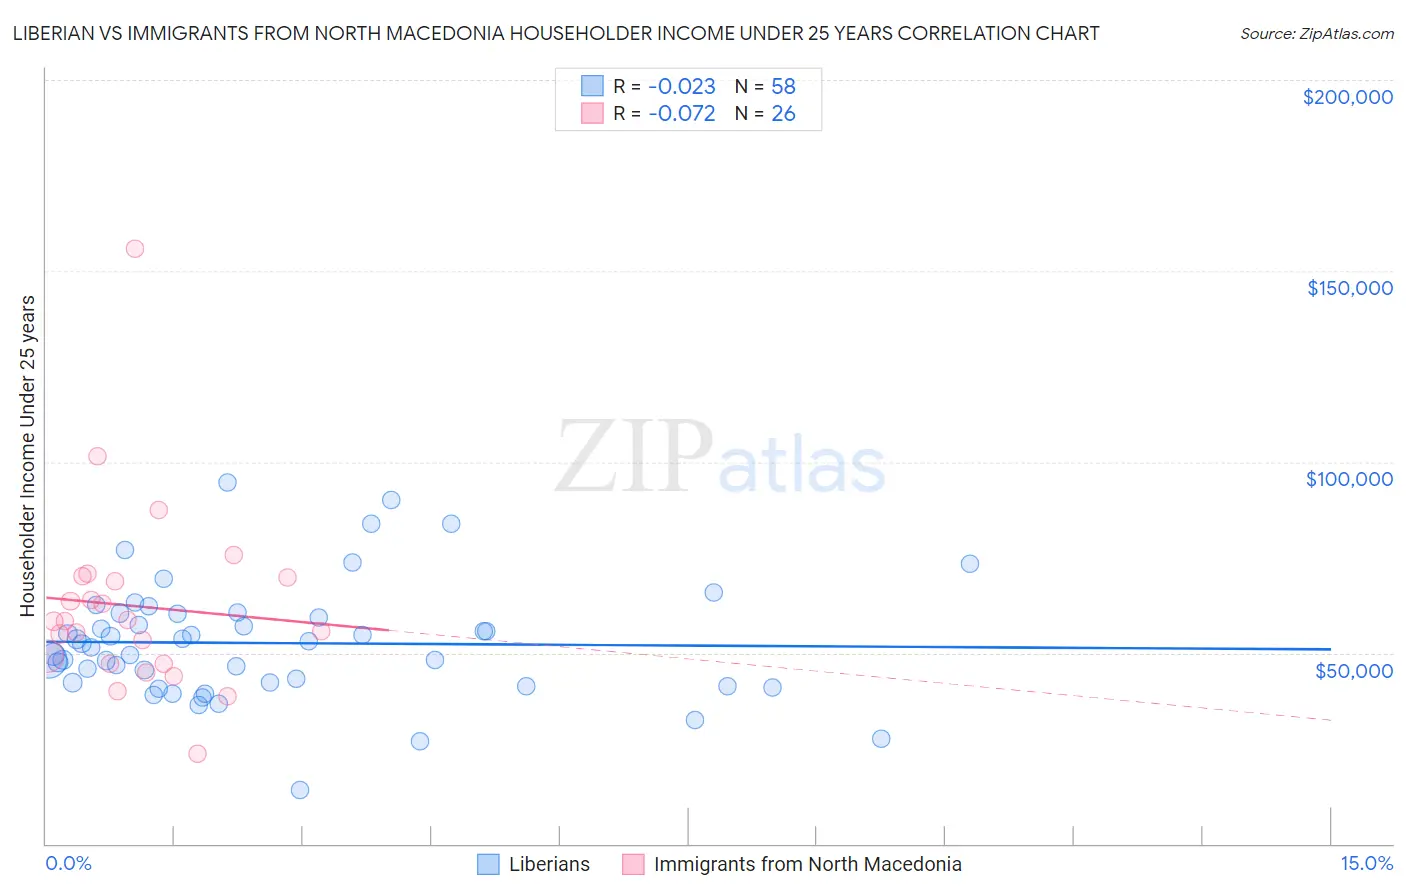 Liberian vs Immigrants from North Macedonia Householder Income Under 25 years